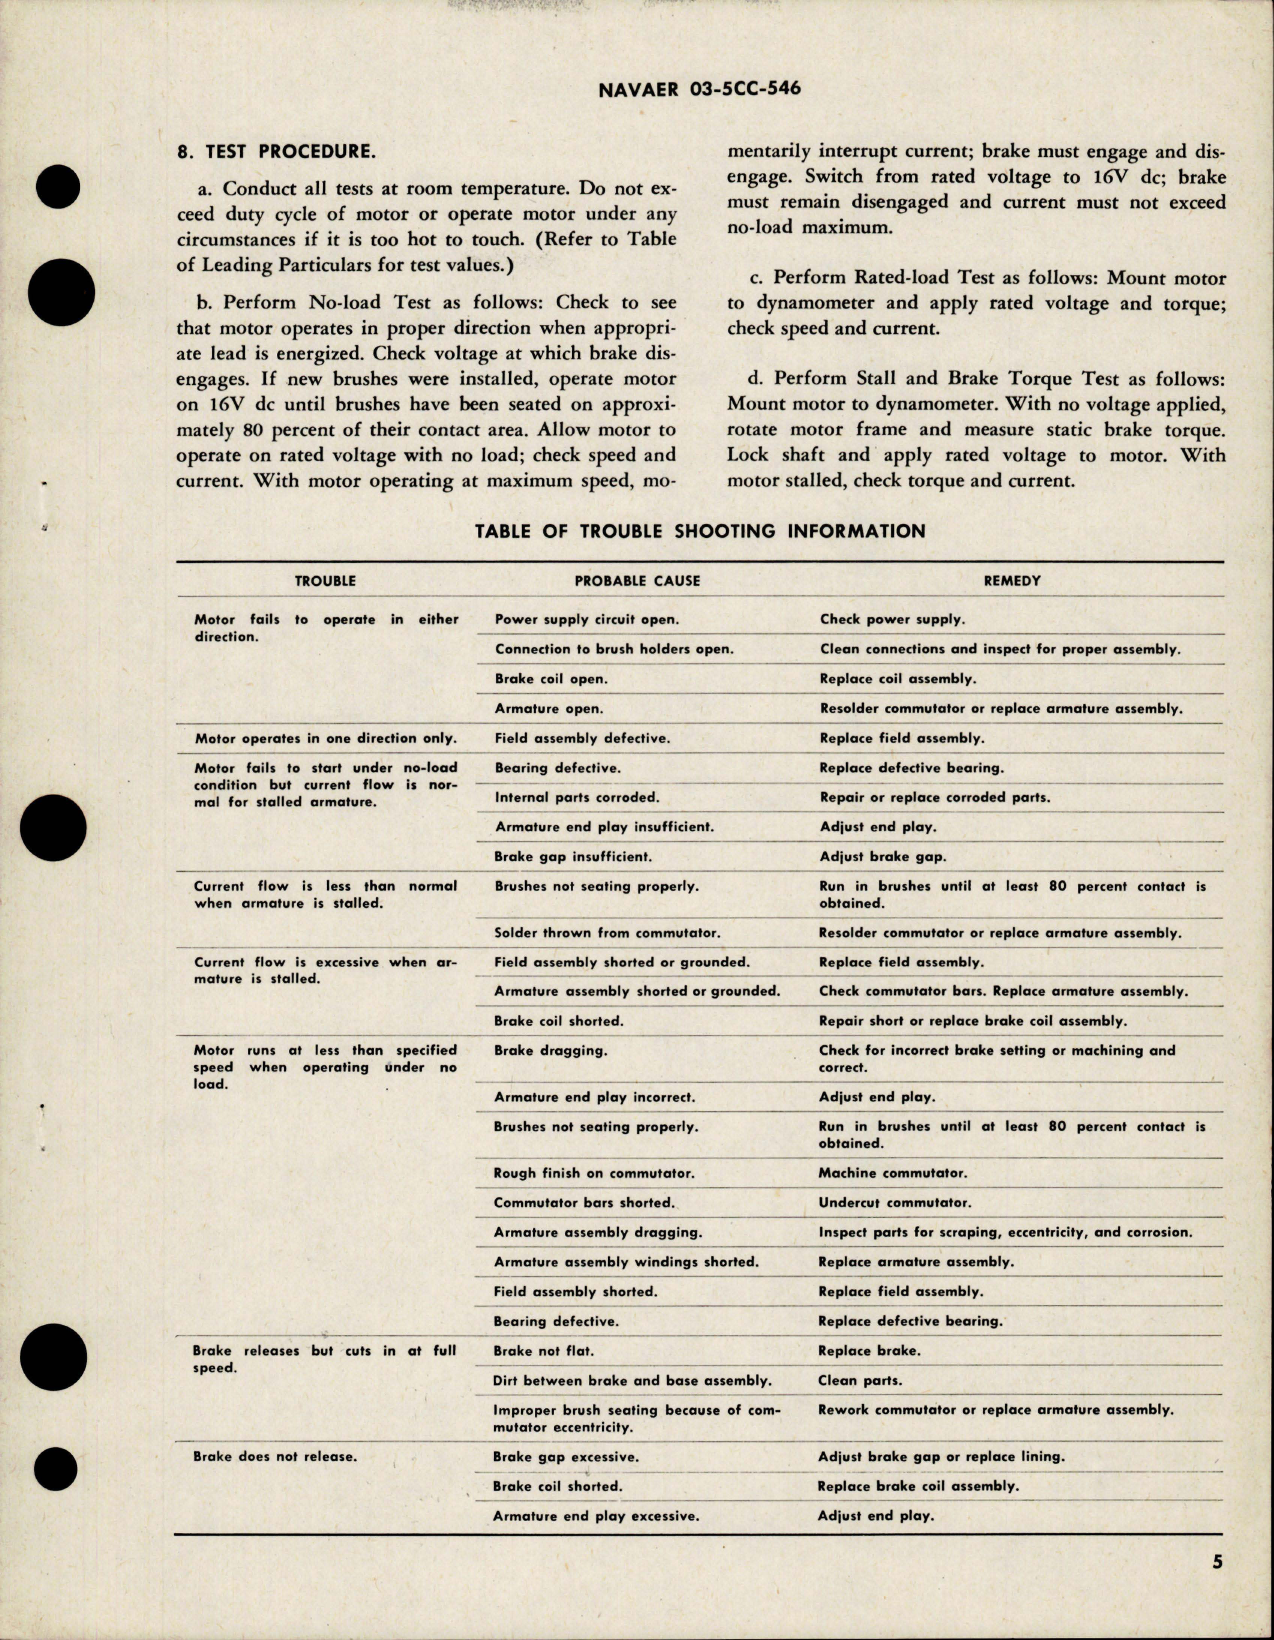 Sample page 5 from AirCorps Library document: Overhaul Instructions with Parts Breakdown for Direct Current Motor - Part 26900-2 